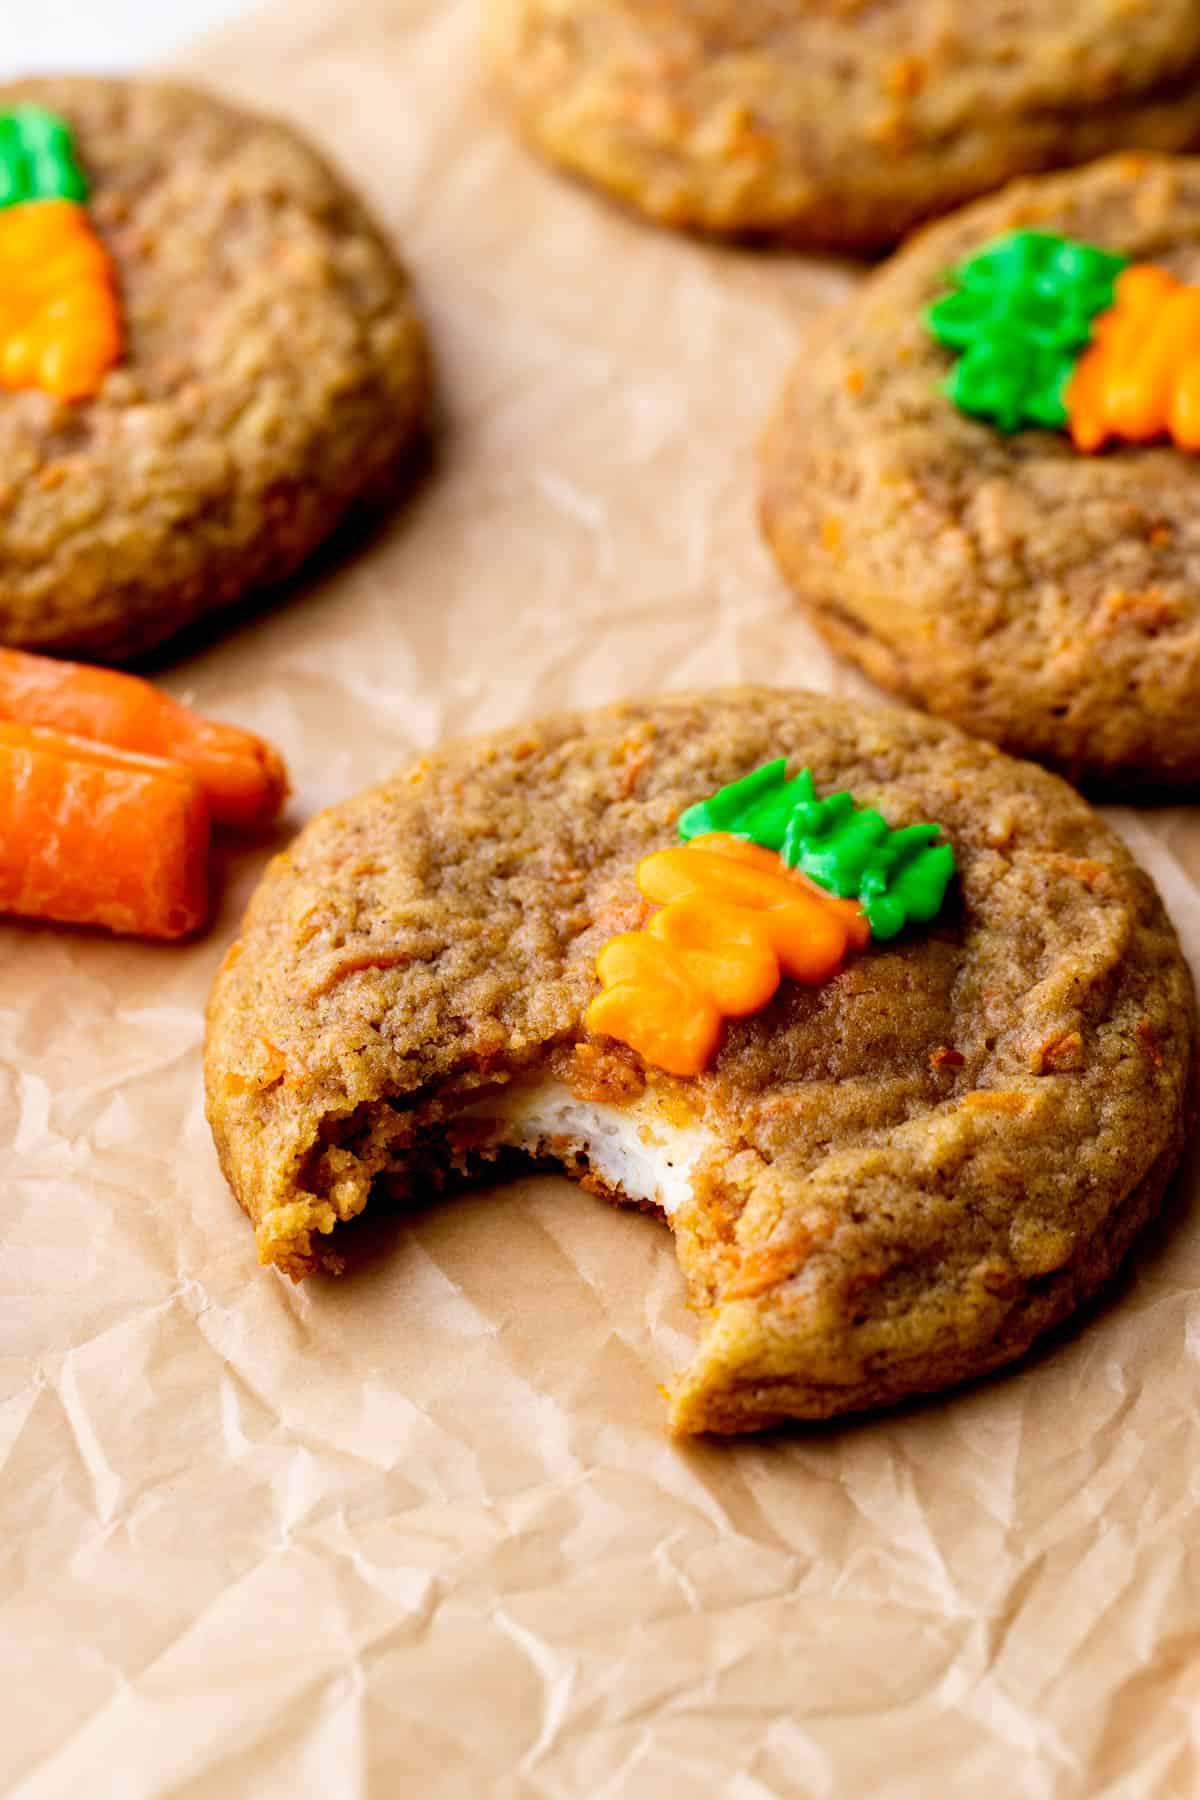 One carrot cake cookie with a bite missing.